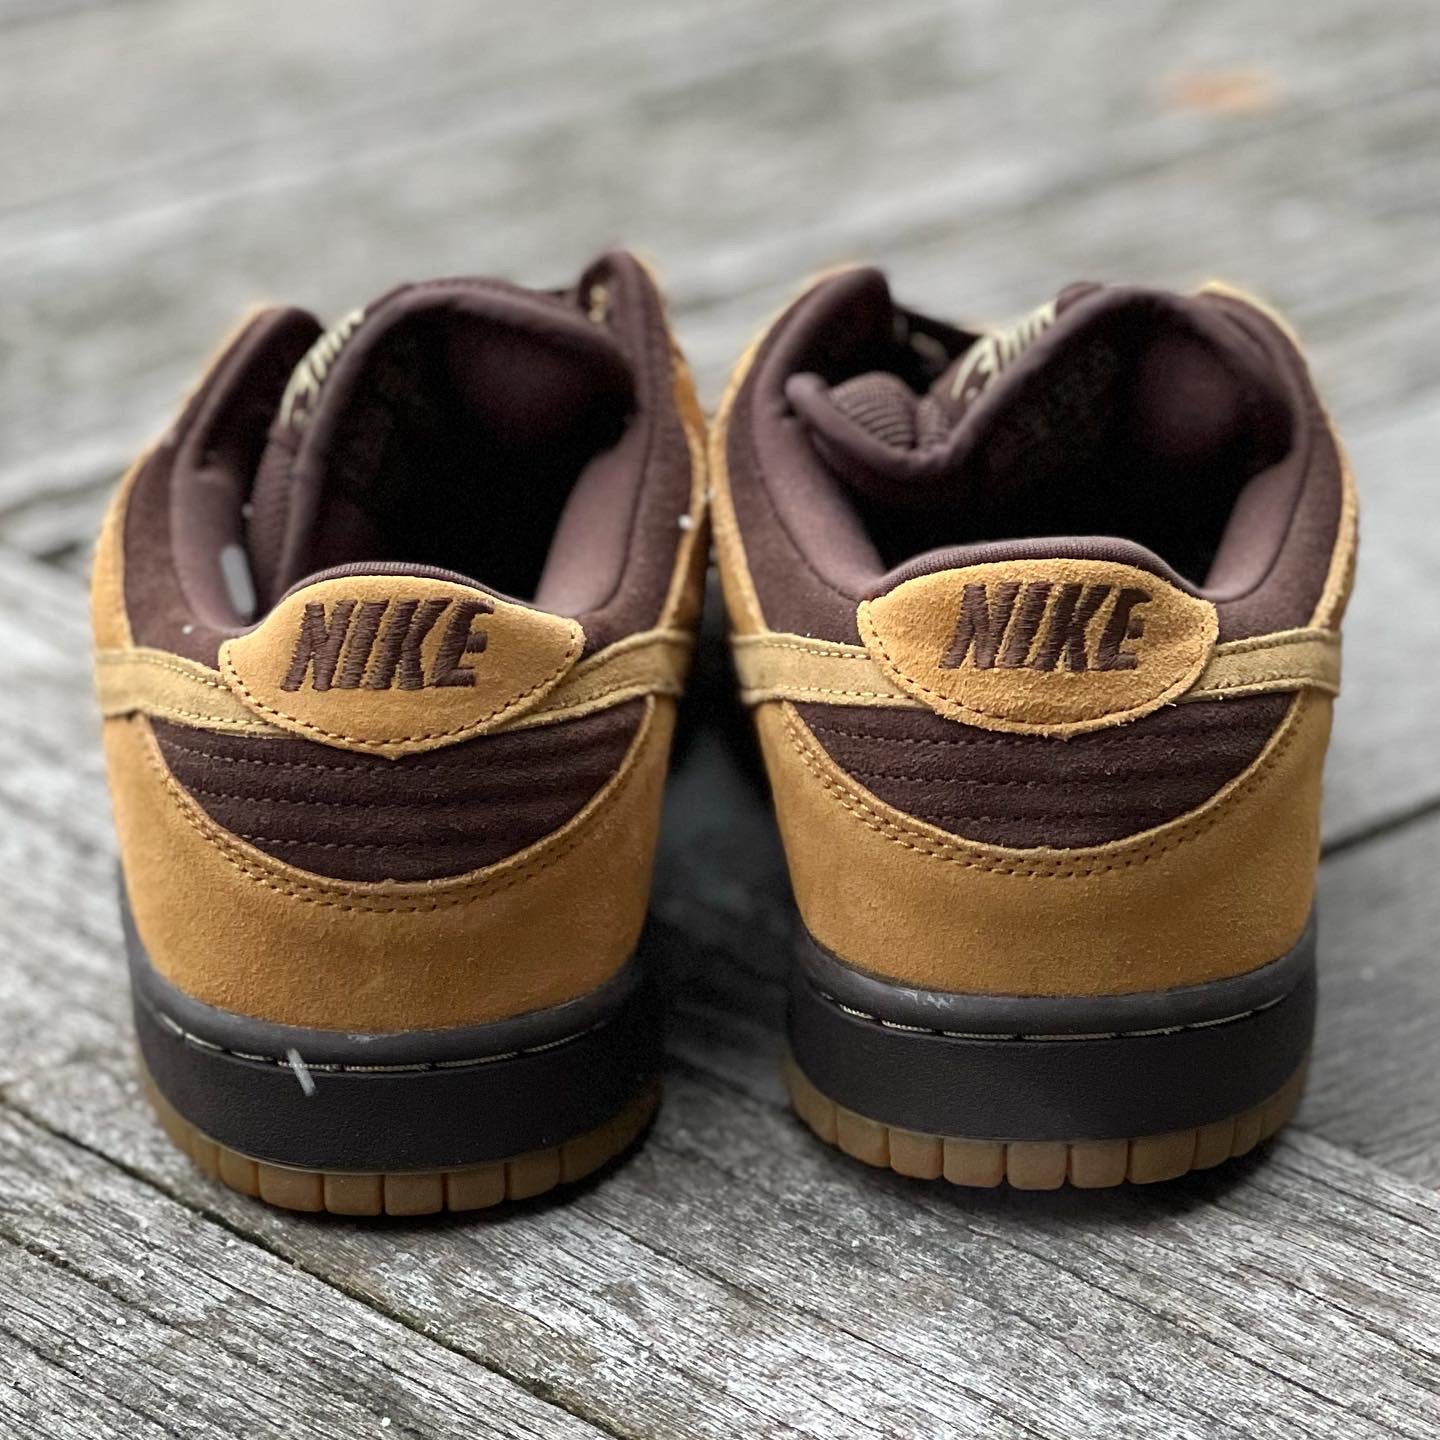 Nike SB Dunk Low Brown Pack Size 10.5